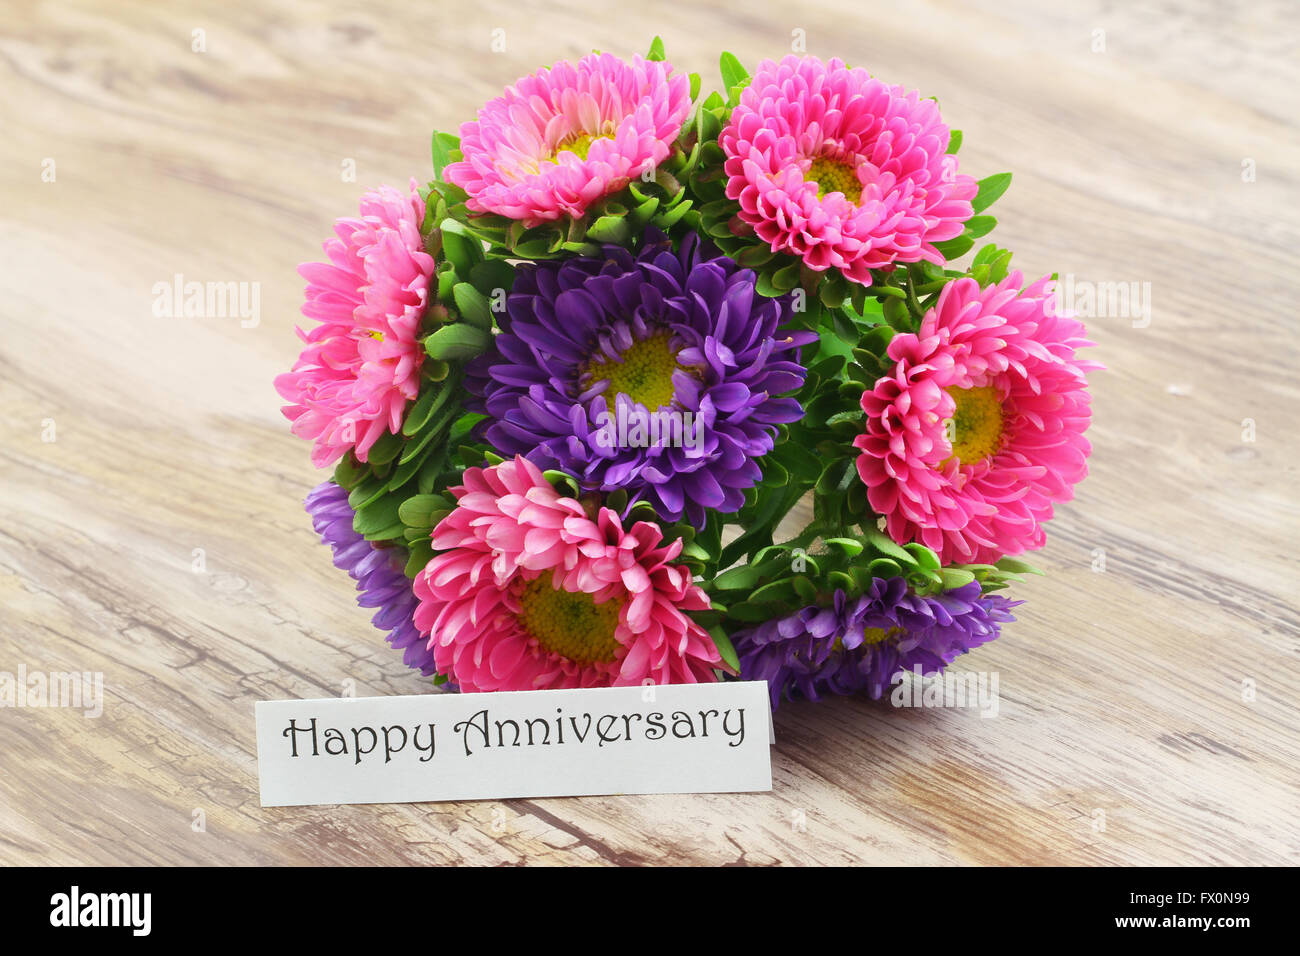 Happy Anniversary card with colorful daisy bouquet on wooden surface Stock Photo